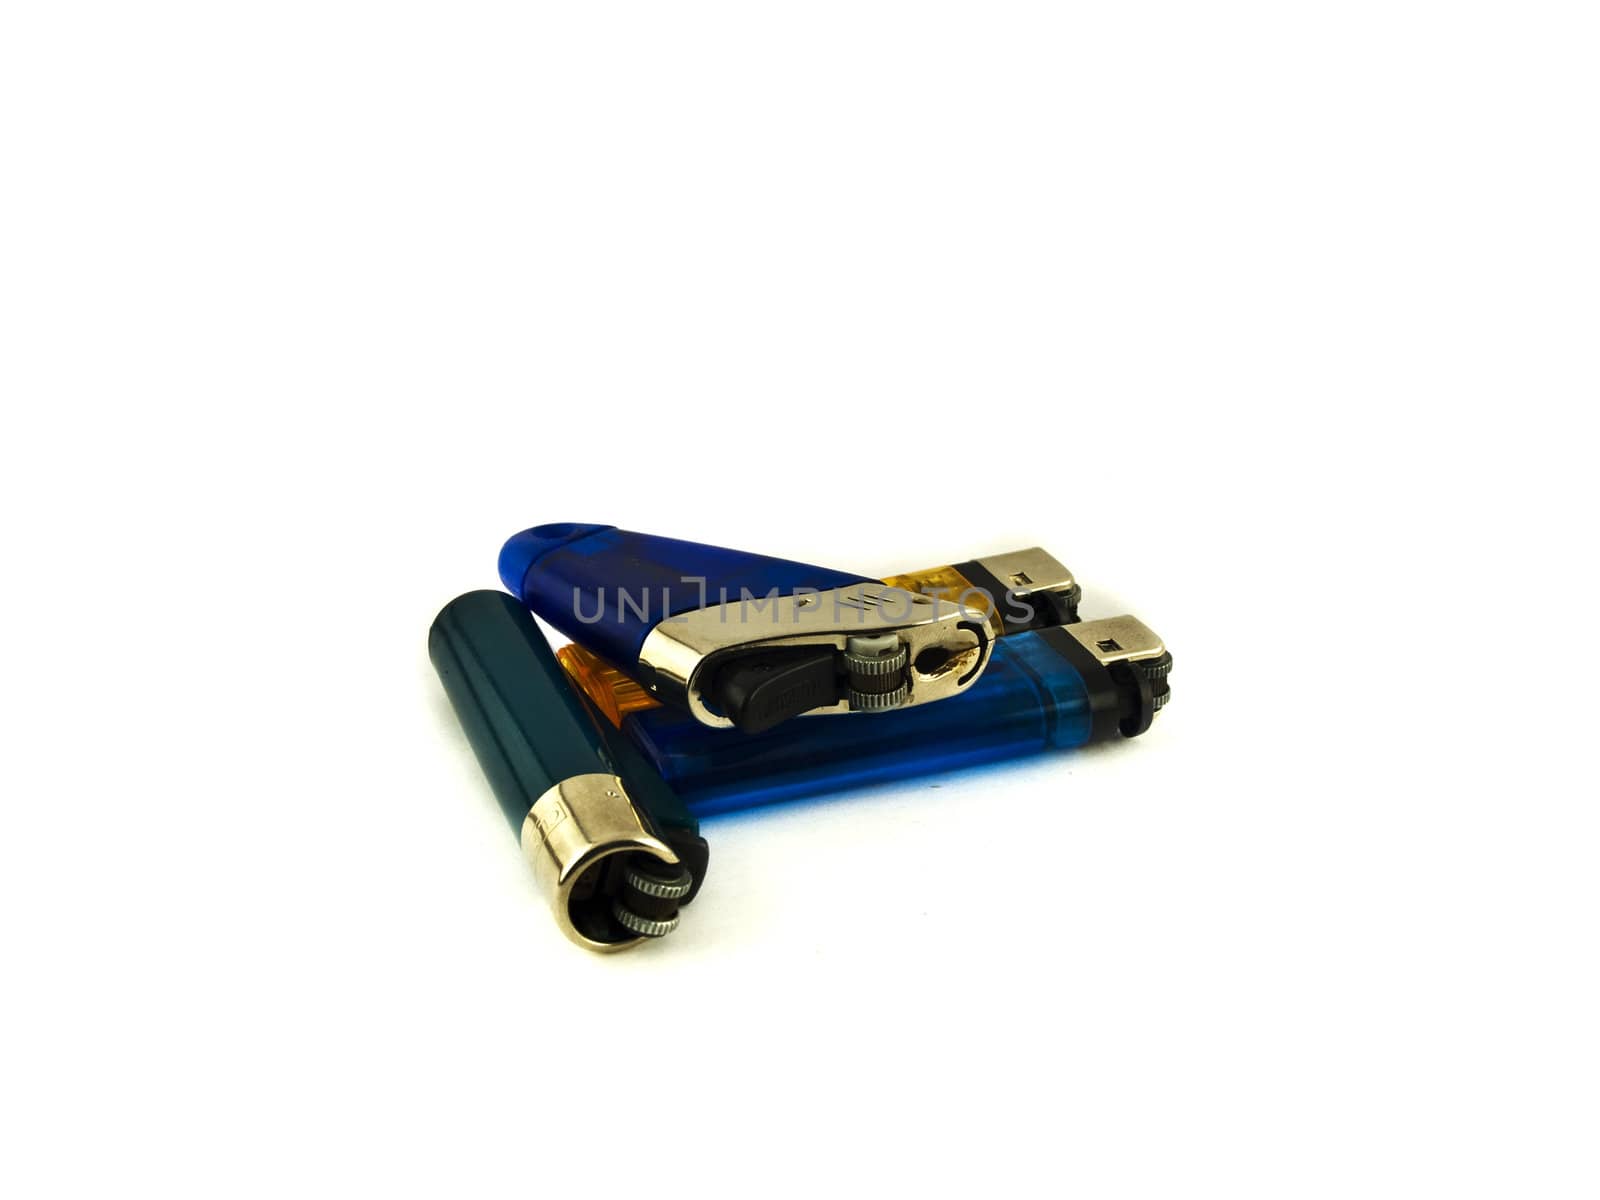 Disposable Lighters on White Background by bobbigmac